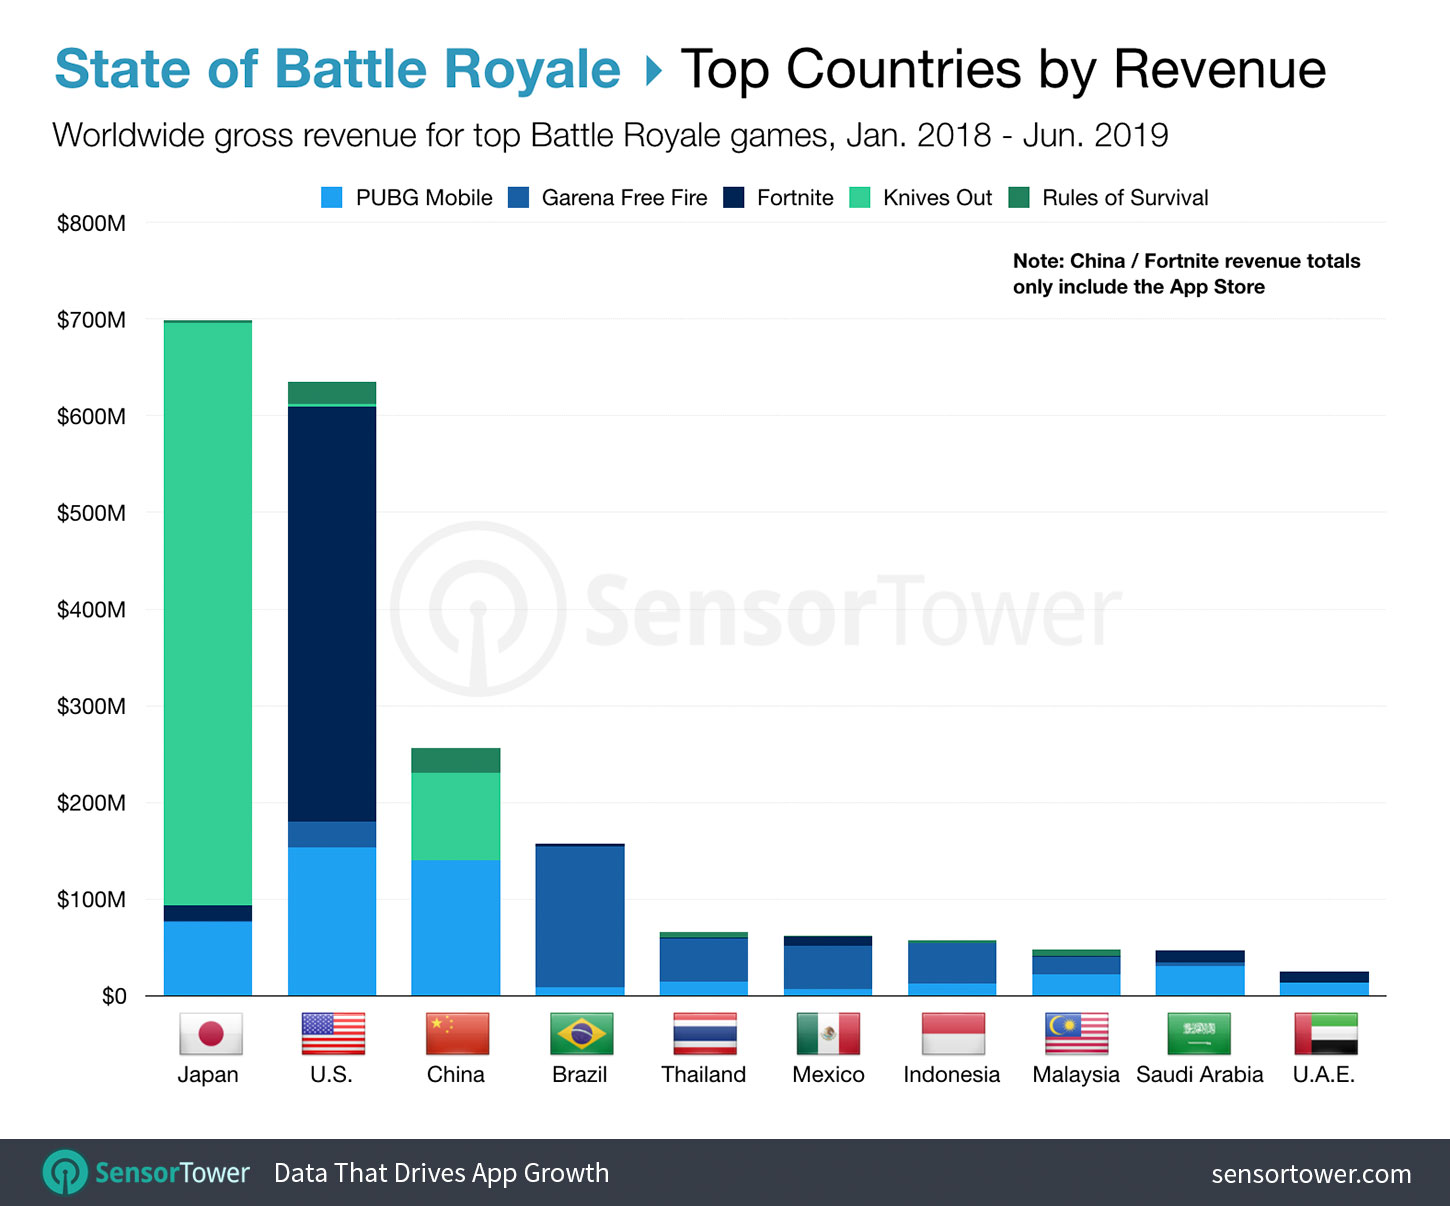 Top Countries by Worldwide Revenue for Battle Royale Games from Q1 2018 to Q2 2019